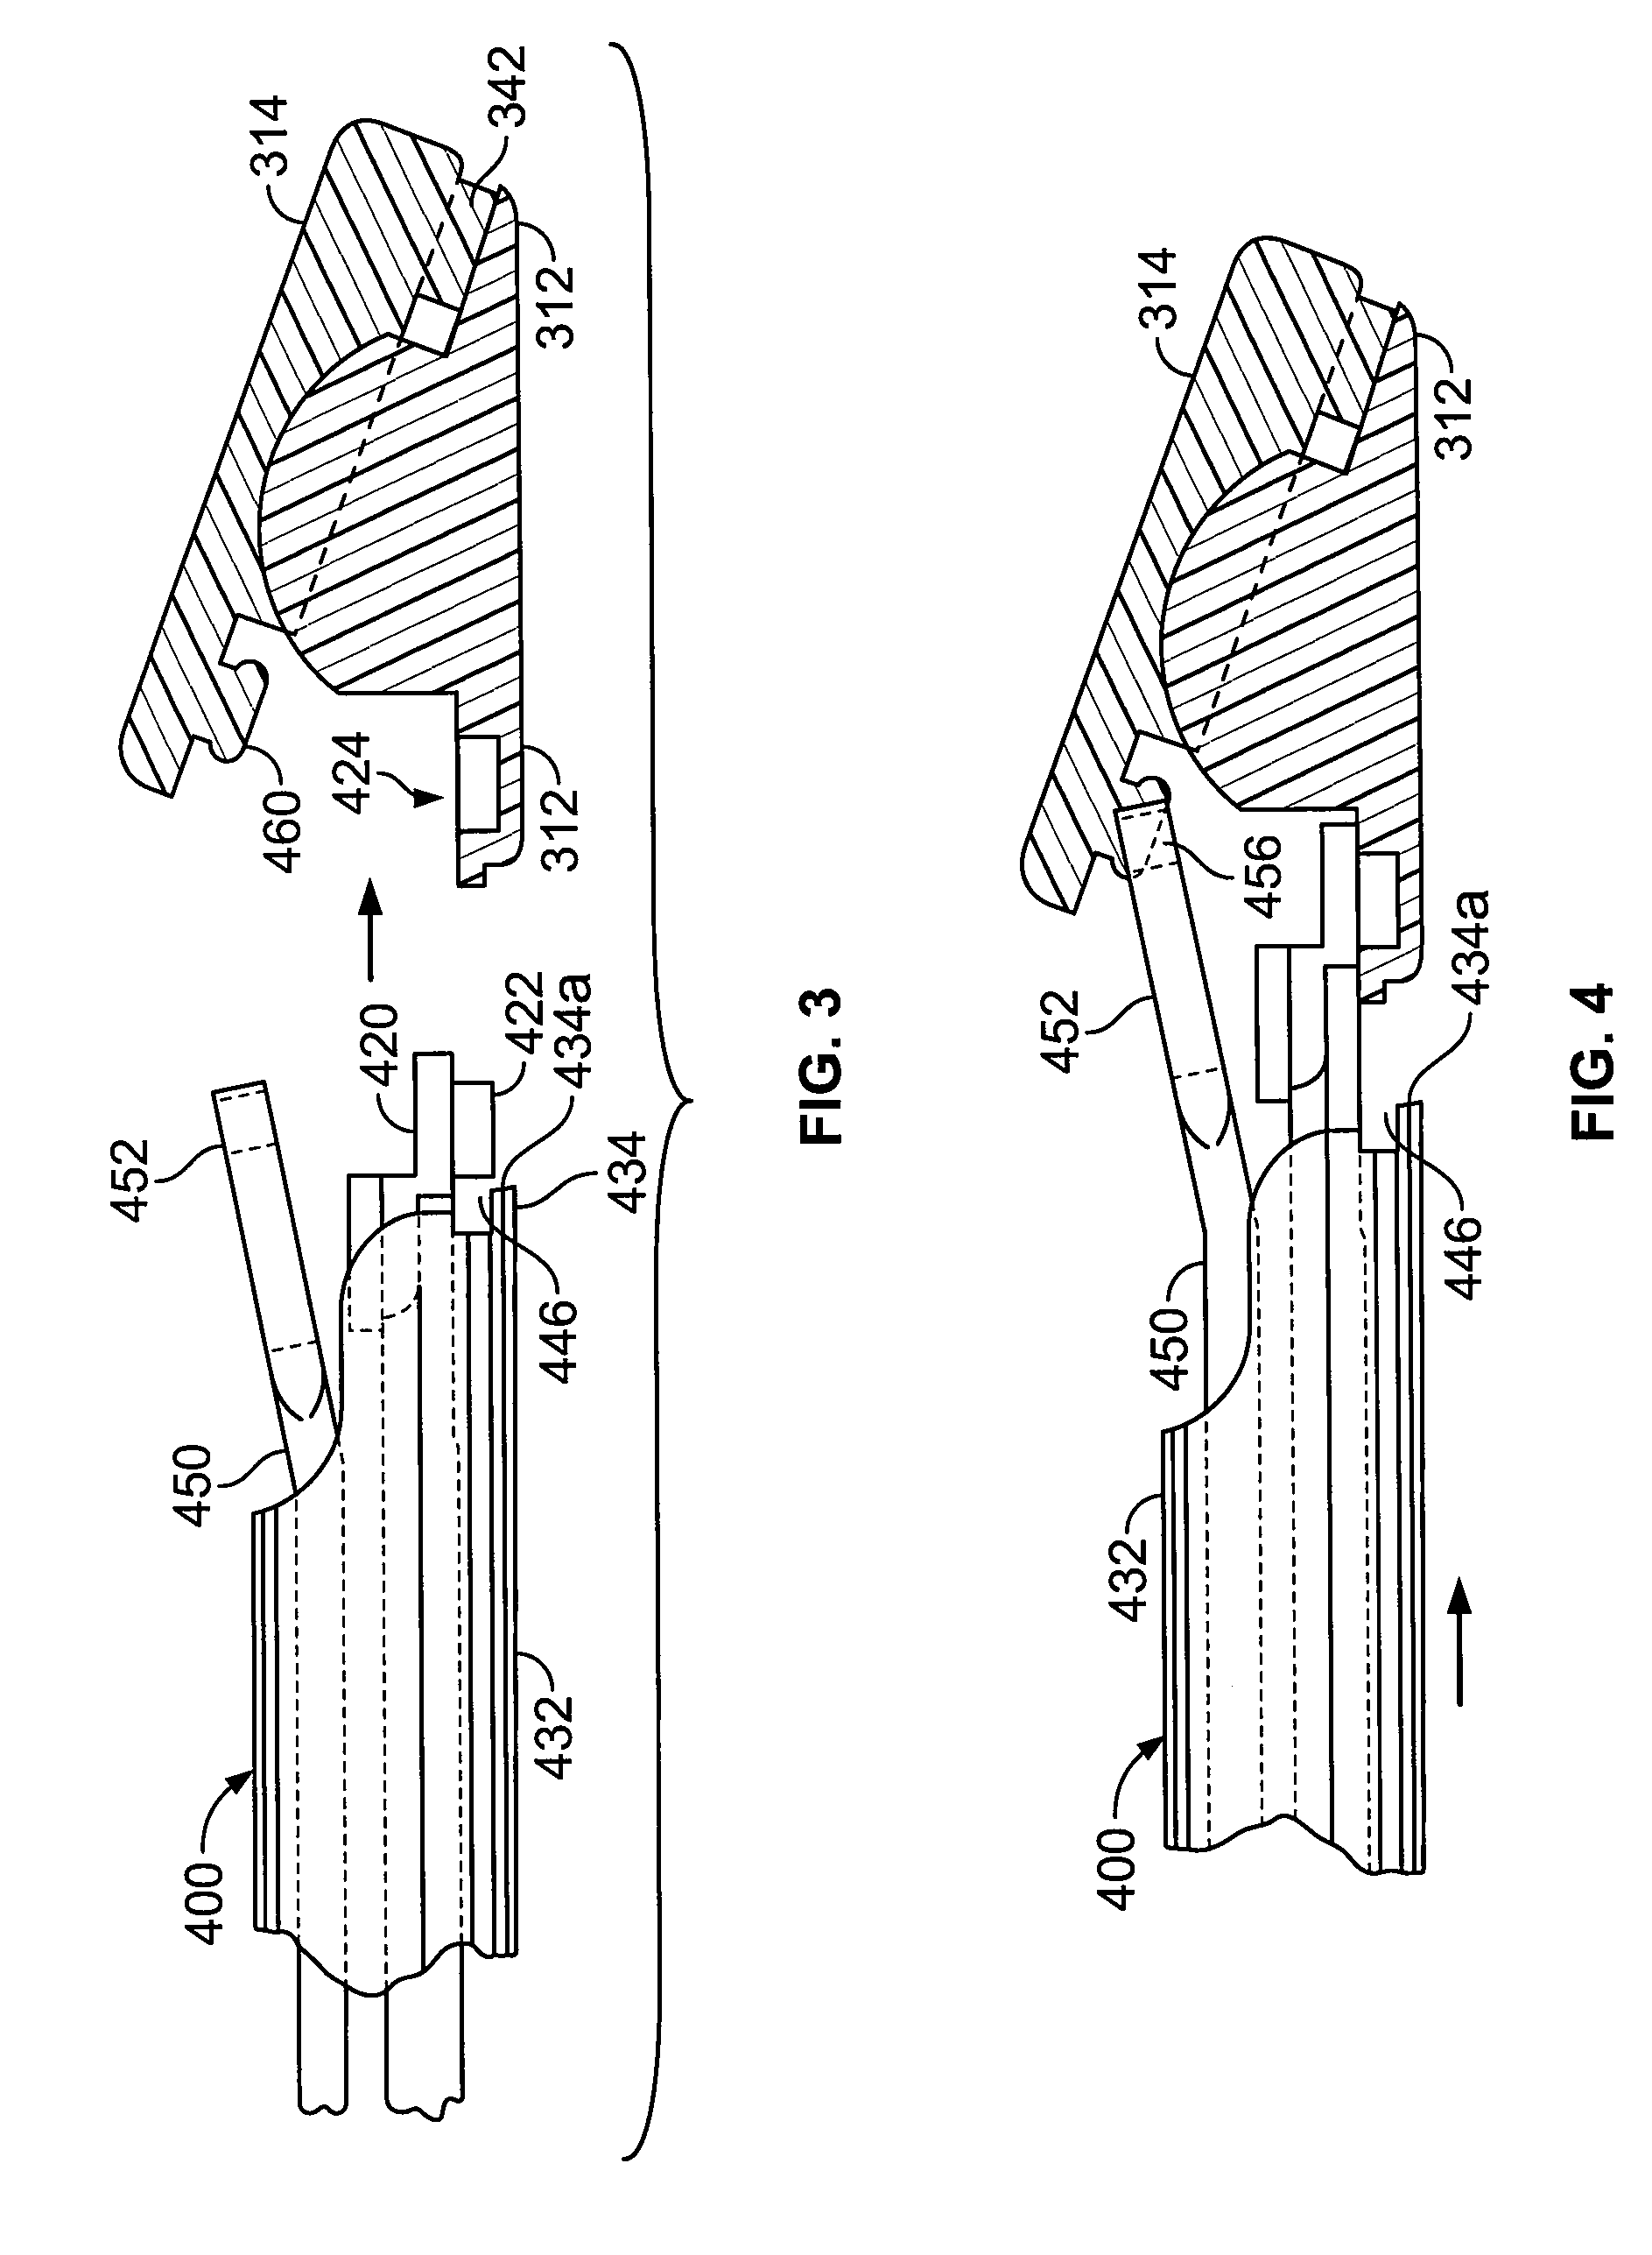 Joint arthroplasty devices having articulating members